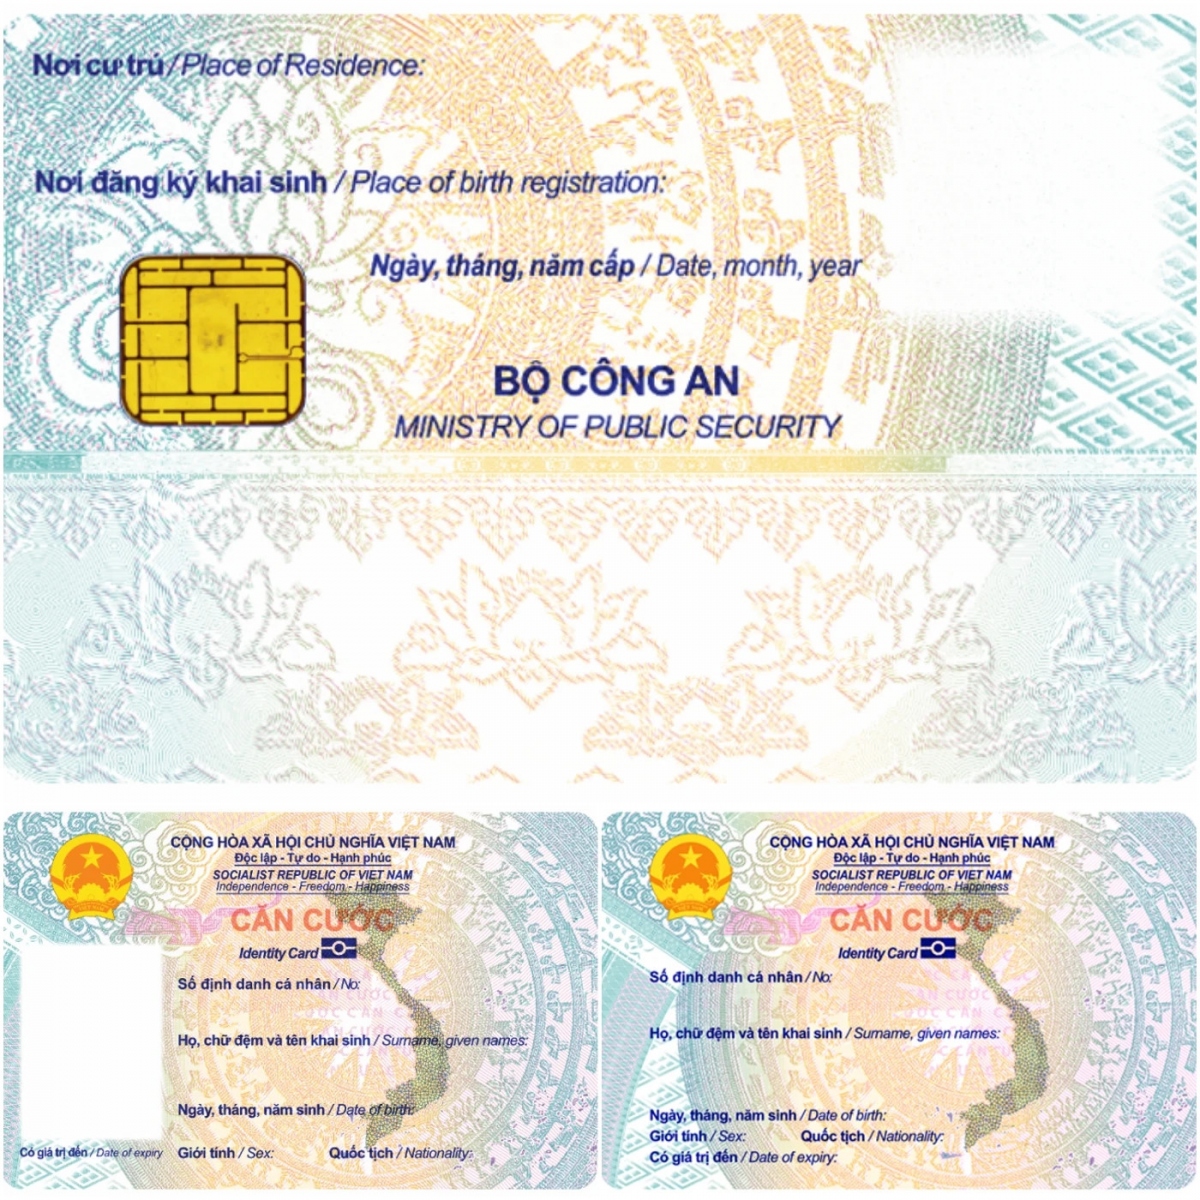 new id card to add iris biometric, adn, and voice information picture 1